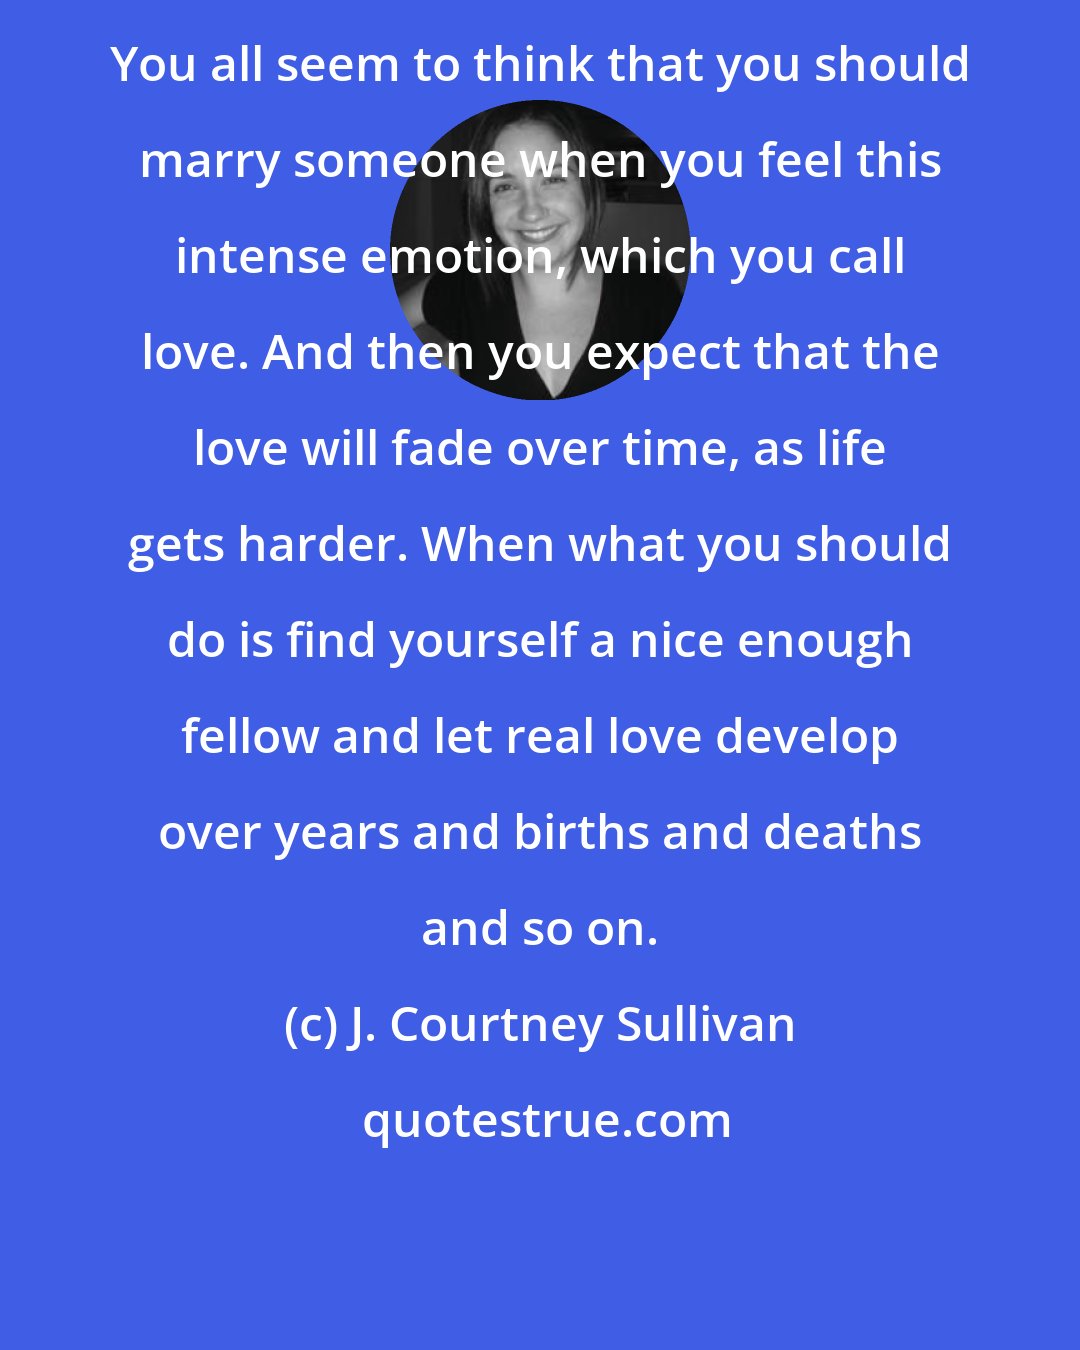 J. Courtney Sullivan: You all seem to think that you should marry someone when you feel this intense emotion, which you call love. And then you expect that the love will fade over time, as life gets harder. When what you should do is find yourself a nice enough fellow and let real love develop over years and births and deaths and so on.